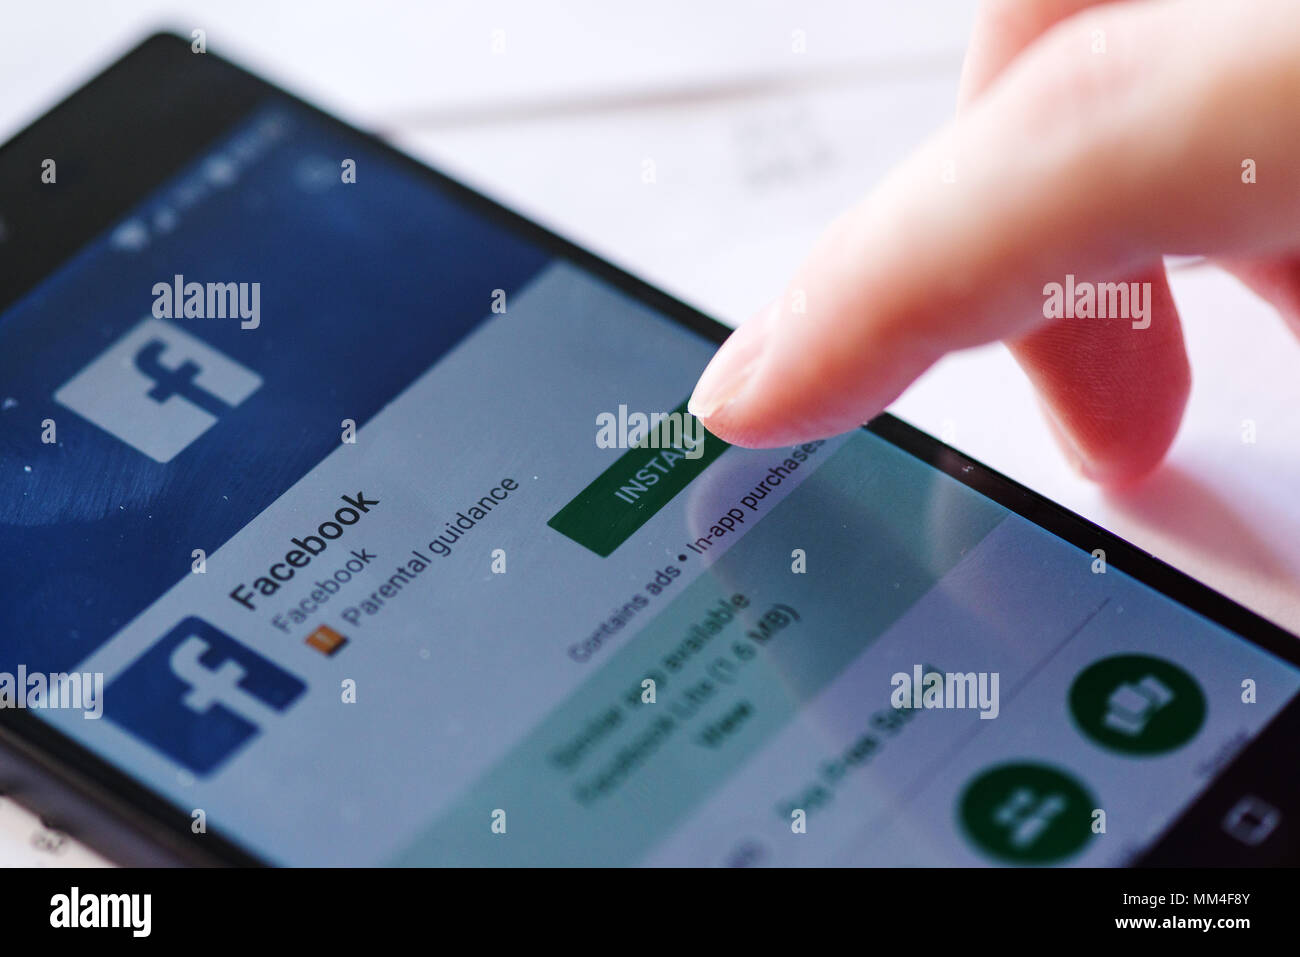 NOVI SAD, SERBIA - MAY 8, 2018: Installing Facebook app for Android smartphones on Sony Experia Z5 mobile from Google Play Store. This application has Stock Photo